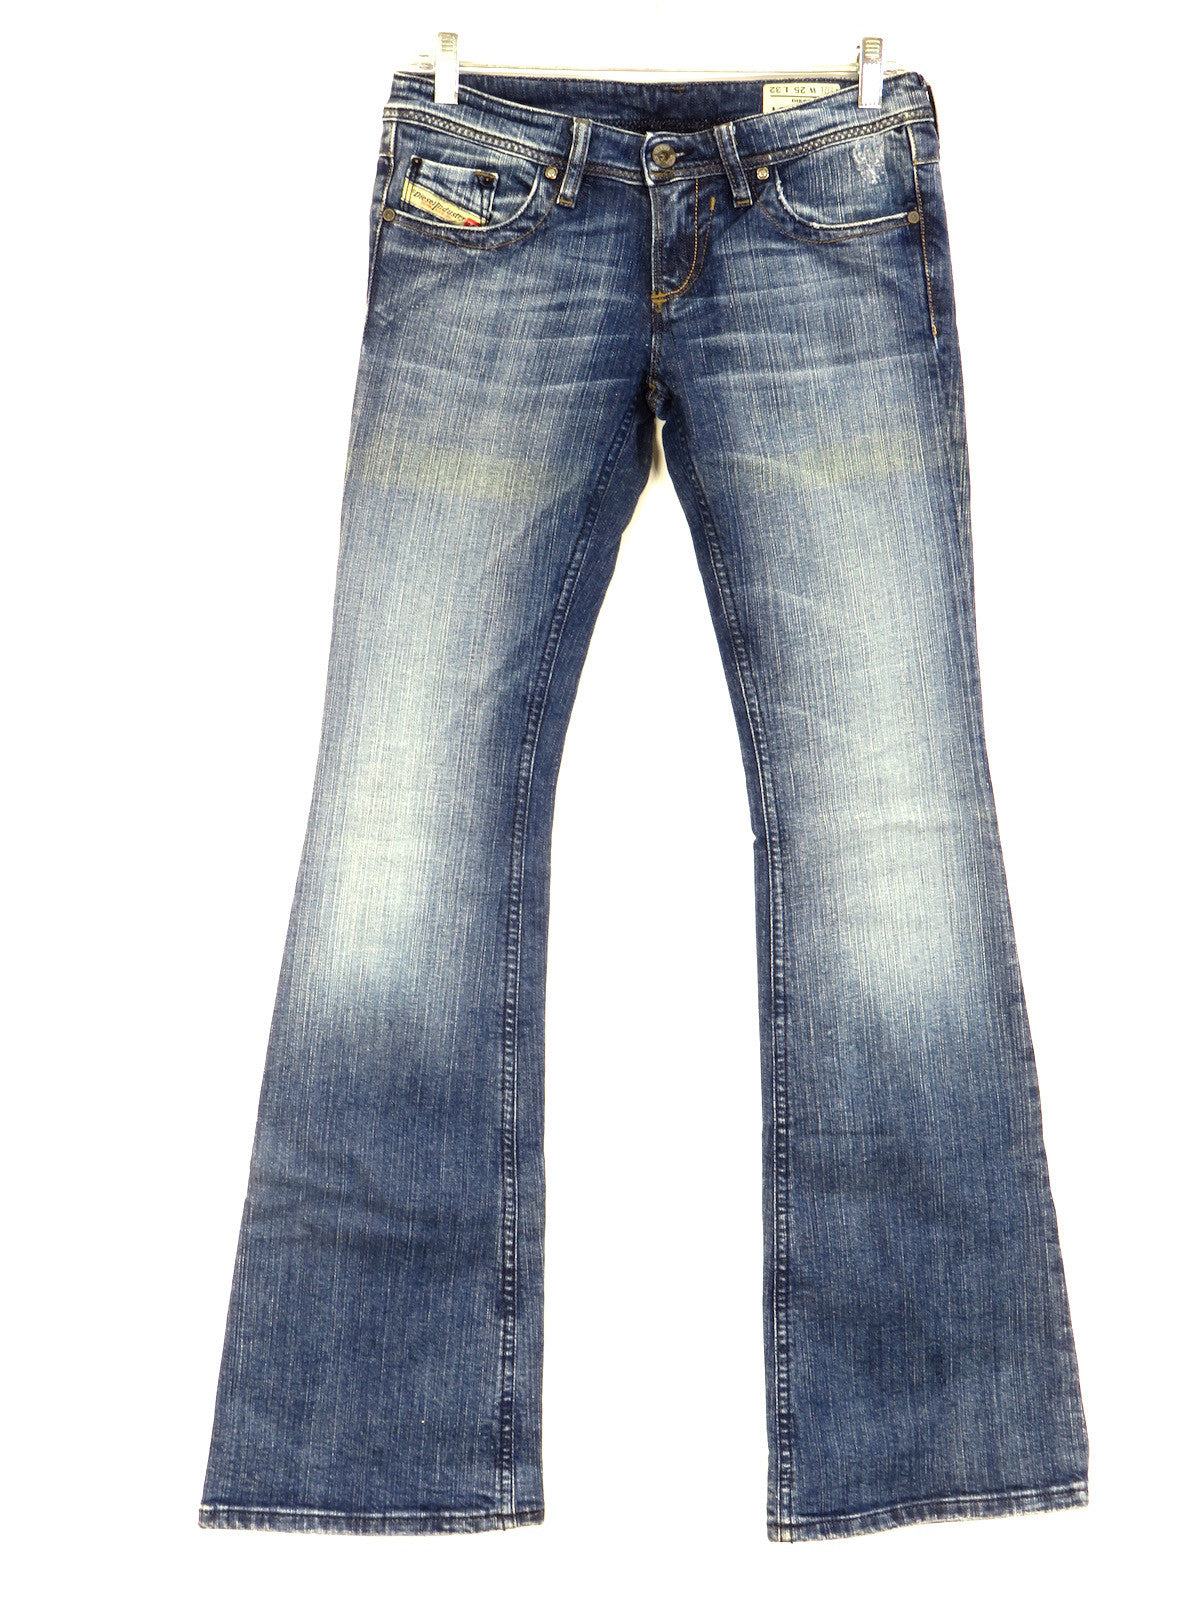 NEW! DIESEL Women Blue Lowky BC Stretch Flare Leg Ragged Look Jeans Si